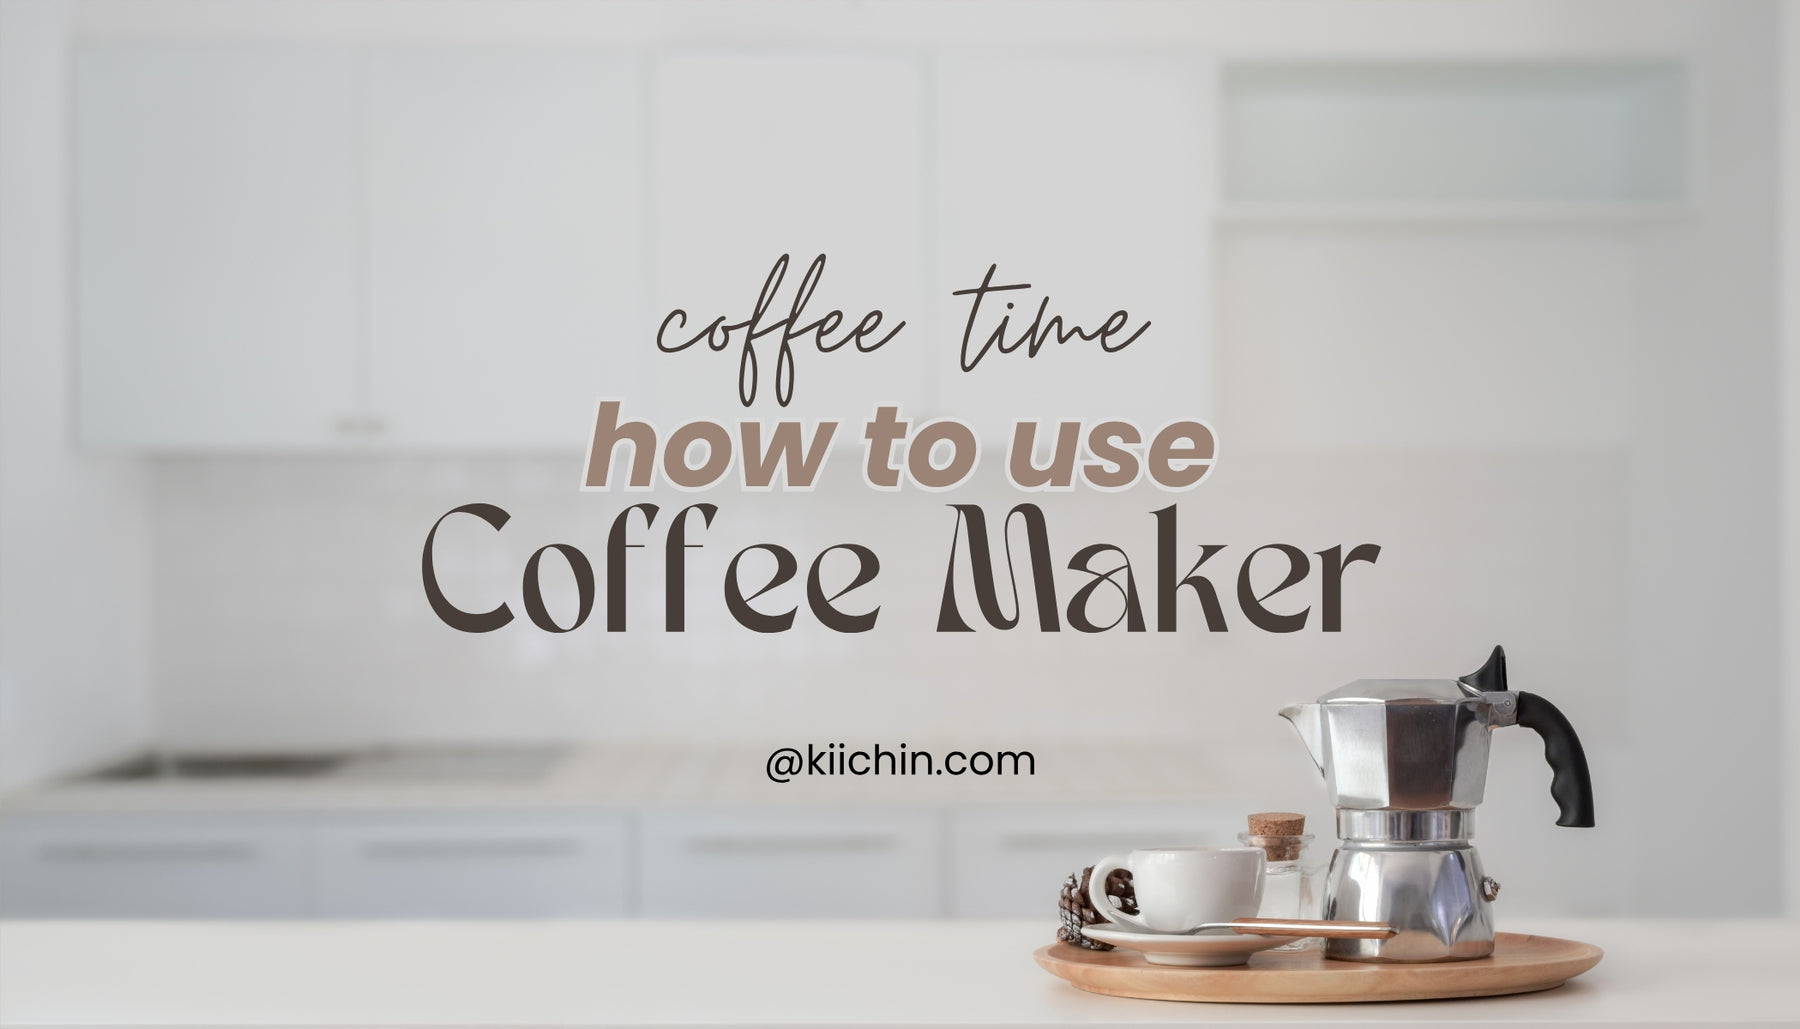 How to Use Coffee Maker: Techniques for Brewing Quality Coffee at Home